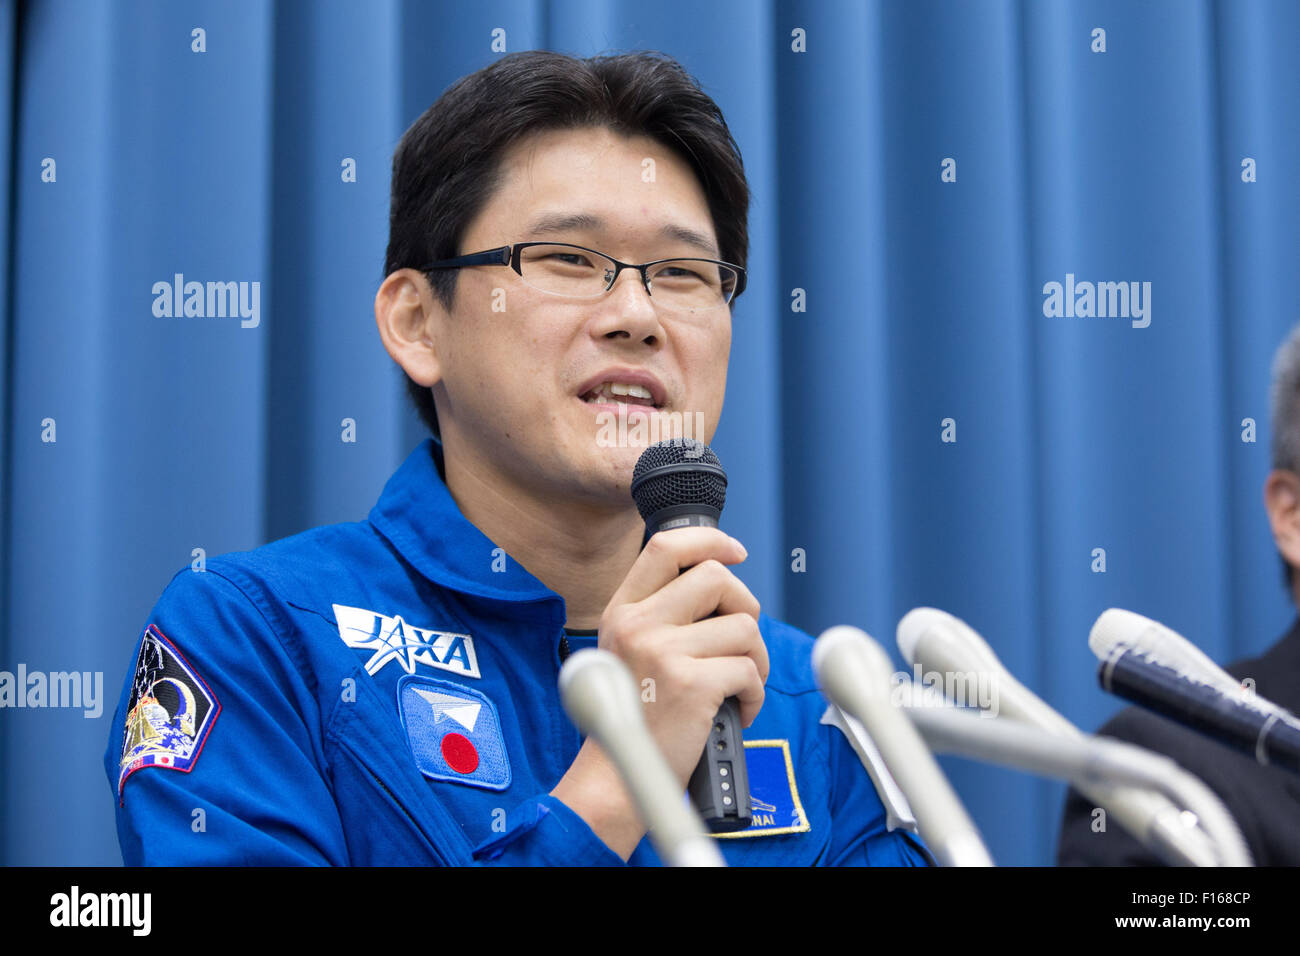 Tokyo, Japan. 27th Aug, 2015. Japanese astronaut Norishige Kanai speaks during a news conference at Tokyo office of the Japan Aerospace Exploration Agency on Thursday, August 27, 2015. Kanai, a 38-year-old former Maritime Self-Defense Force doctor, will travel into space and stay at the International Space Station for about six months from November 2017. He will be the 12th Japanese to travel into space and the seventh to stay for a prolonged period aboard the ISS. © AFLO/Alamy Live News Stock Photo